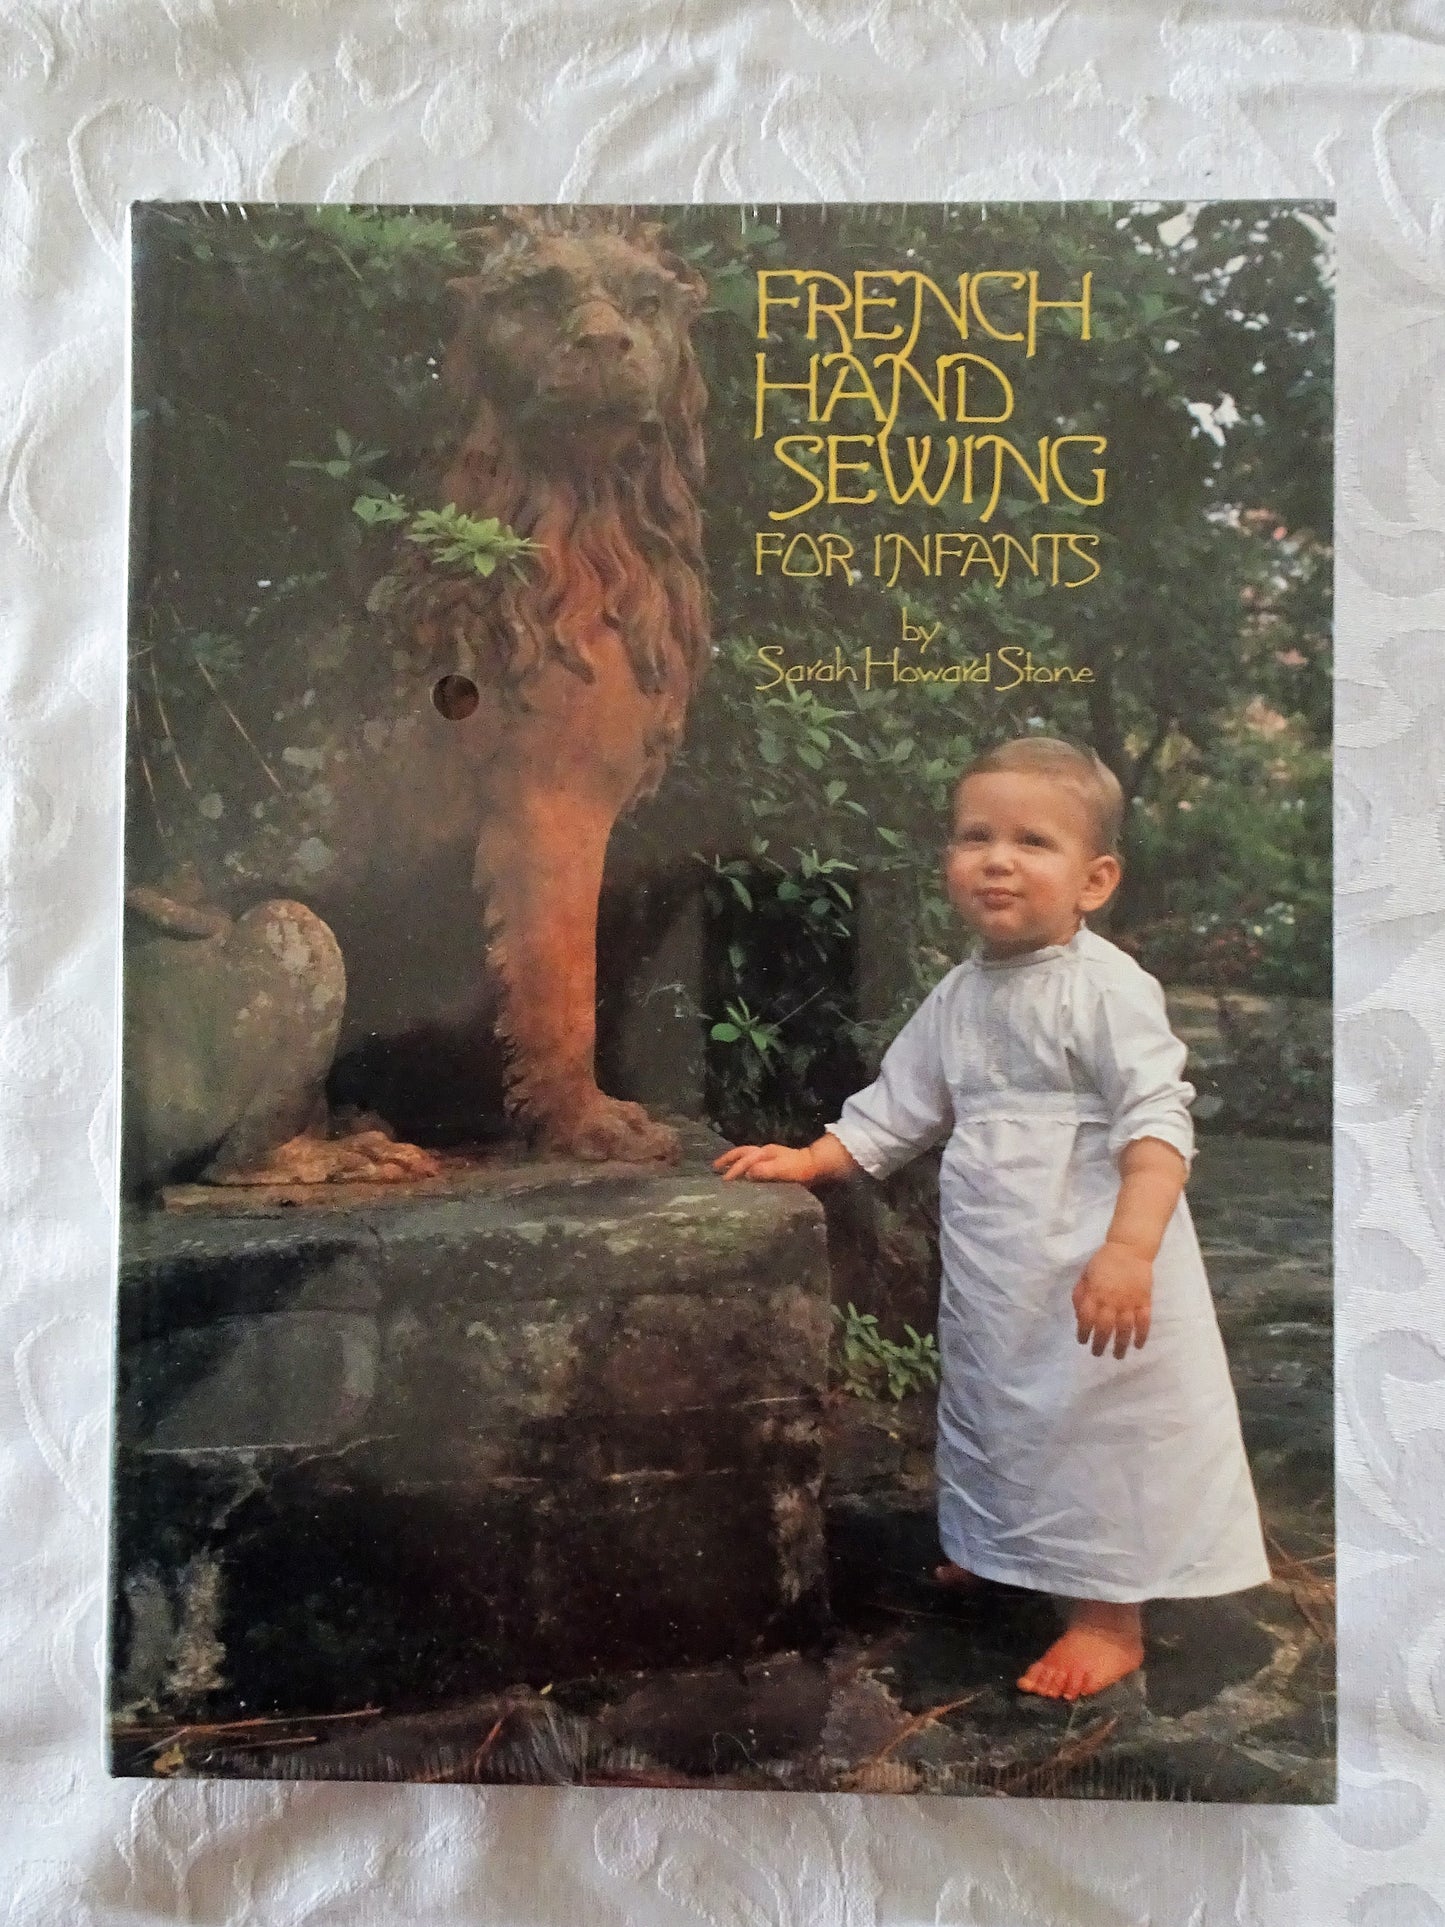 French Hand Sewing For Infants by Sarah Howard Stone